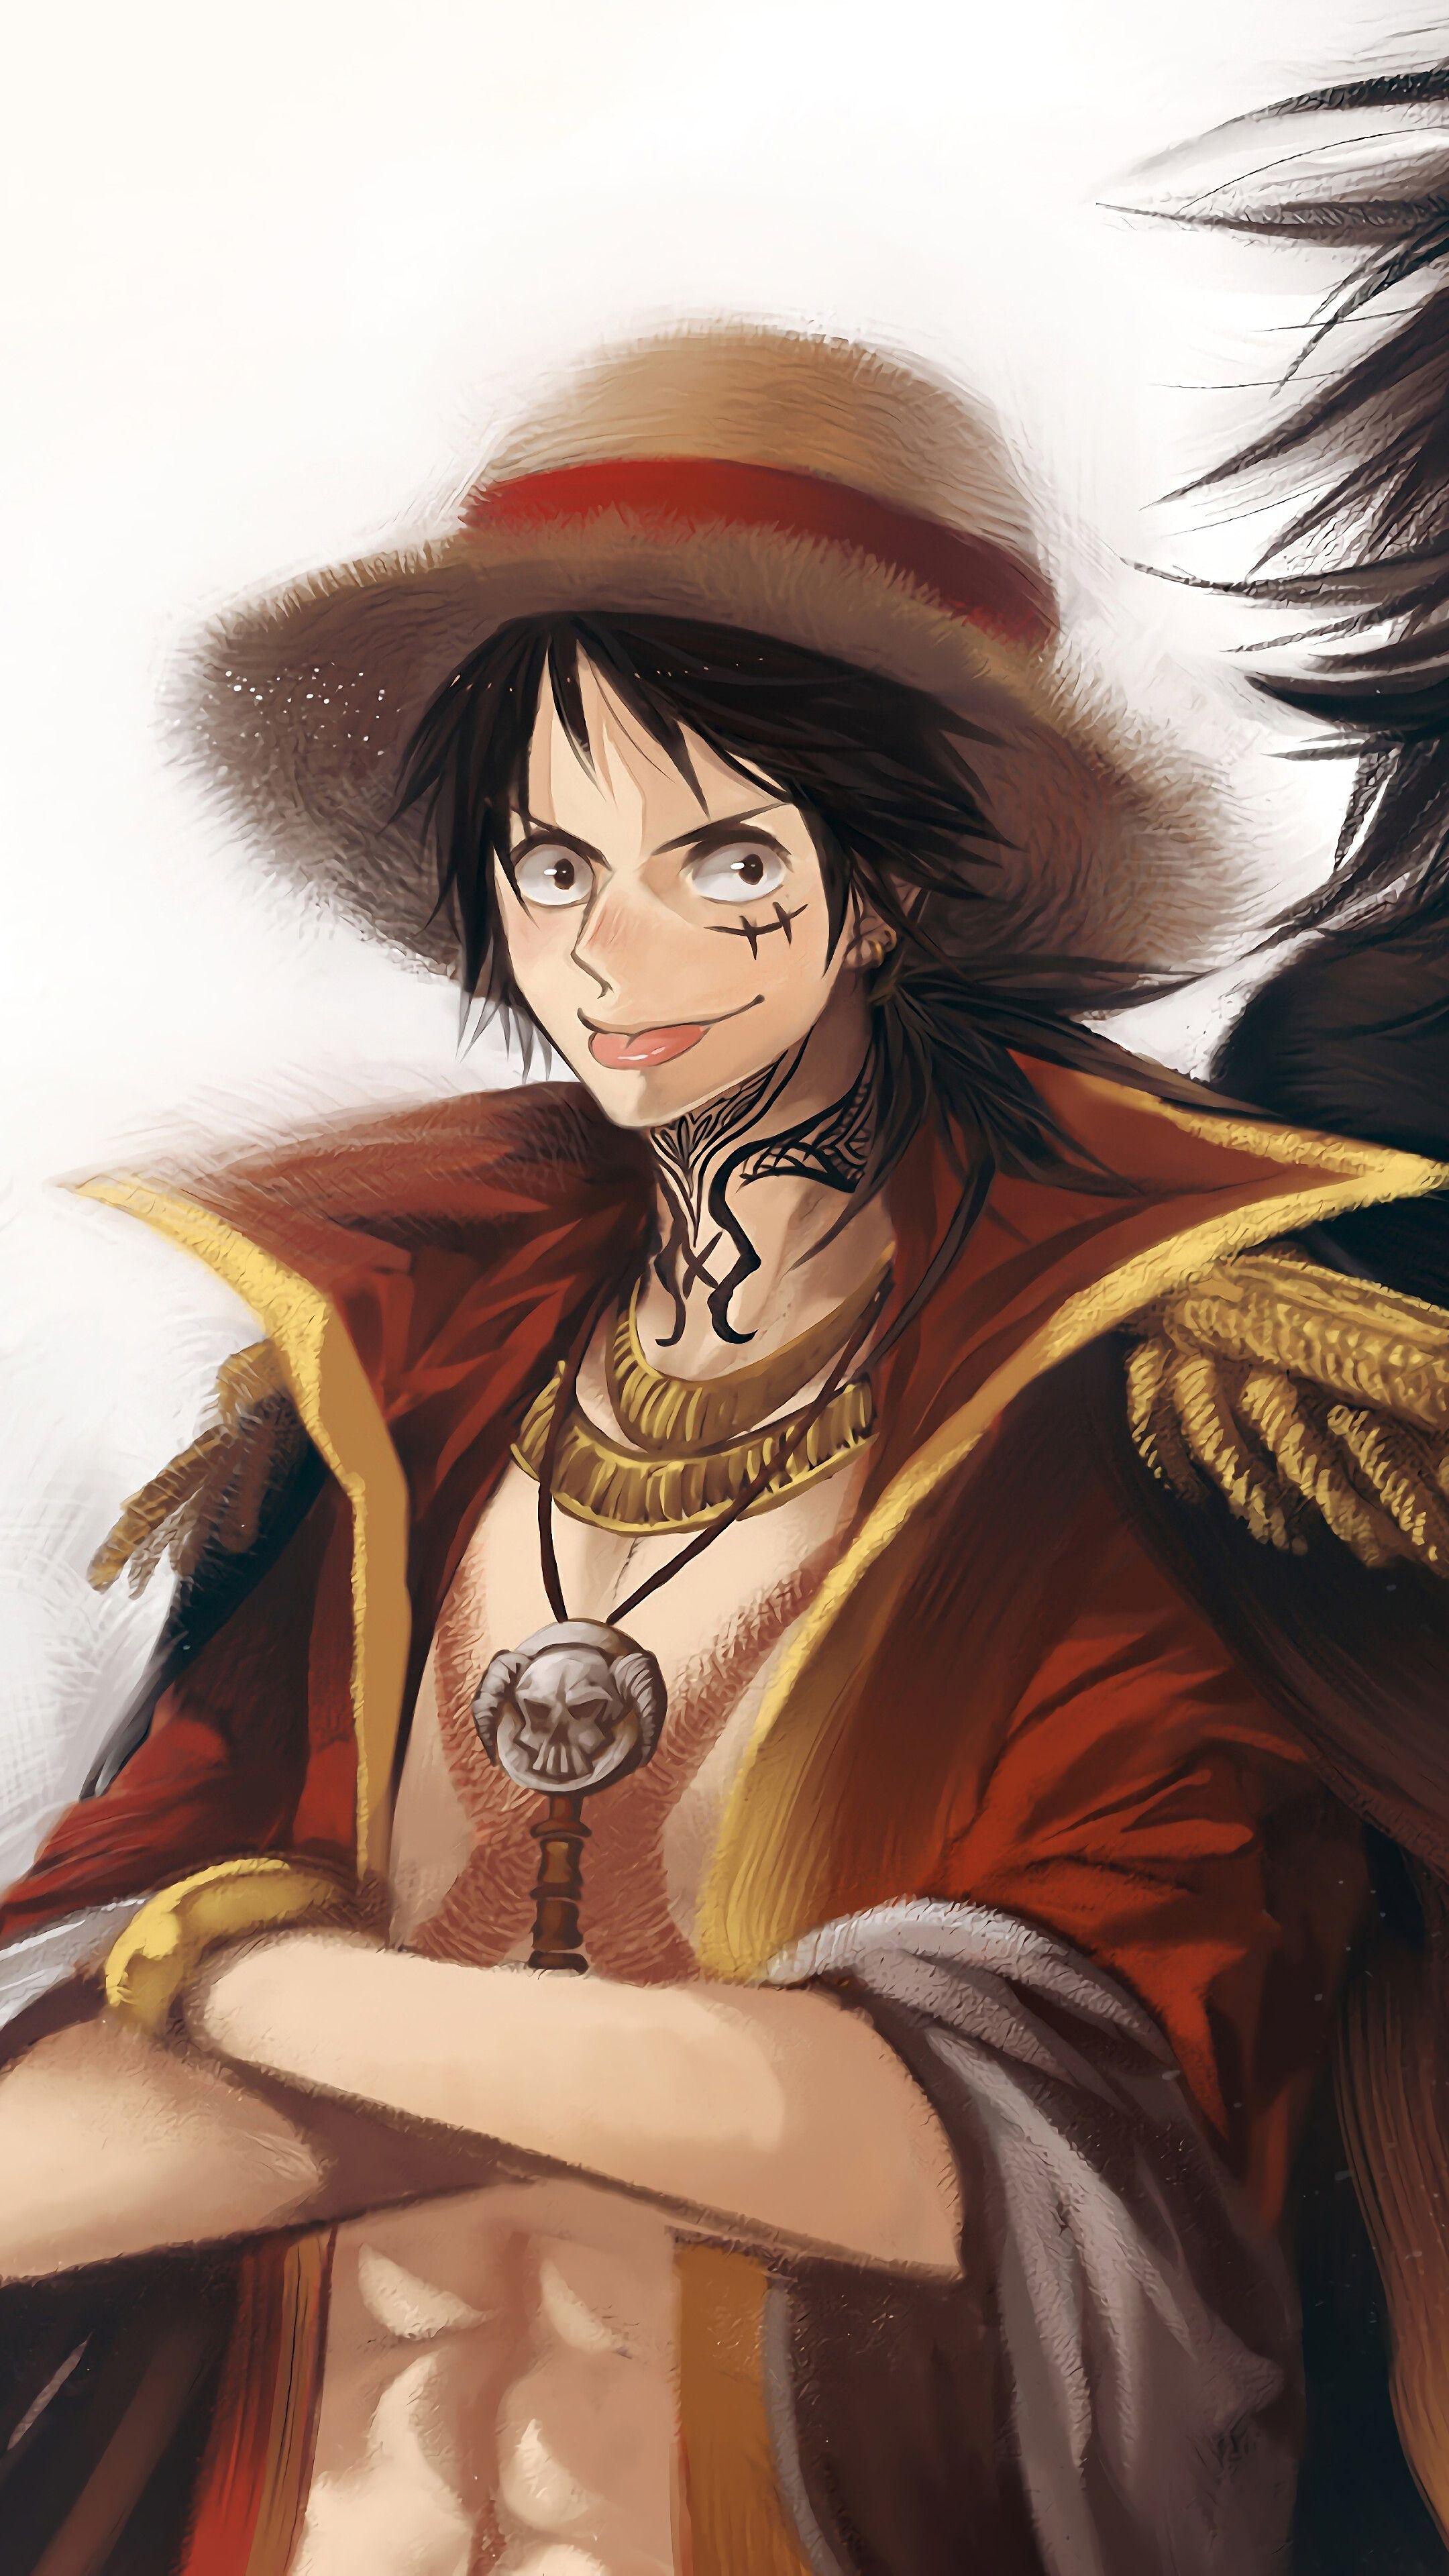 2160 x 3840 · jpeg - Wallpaper Luffy / Luffy Wallpapers (64+ images) / We hope you enjoy our ...